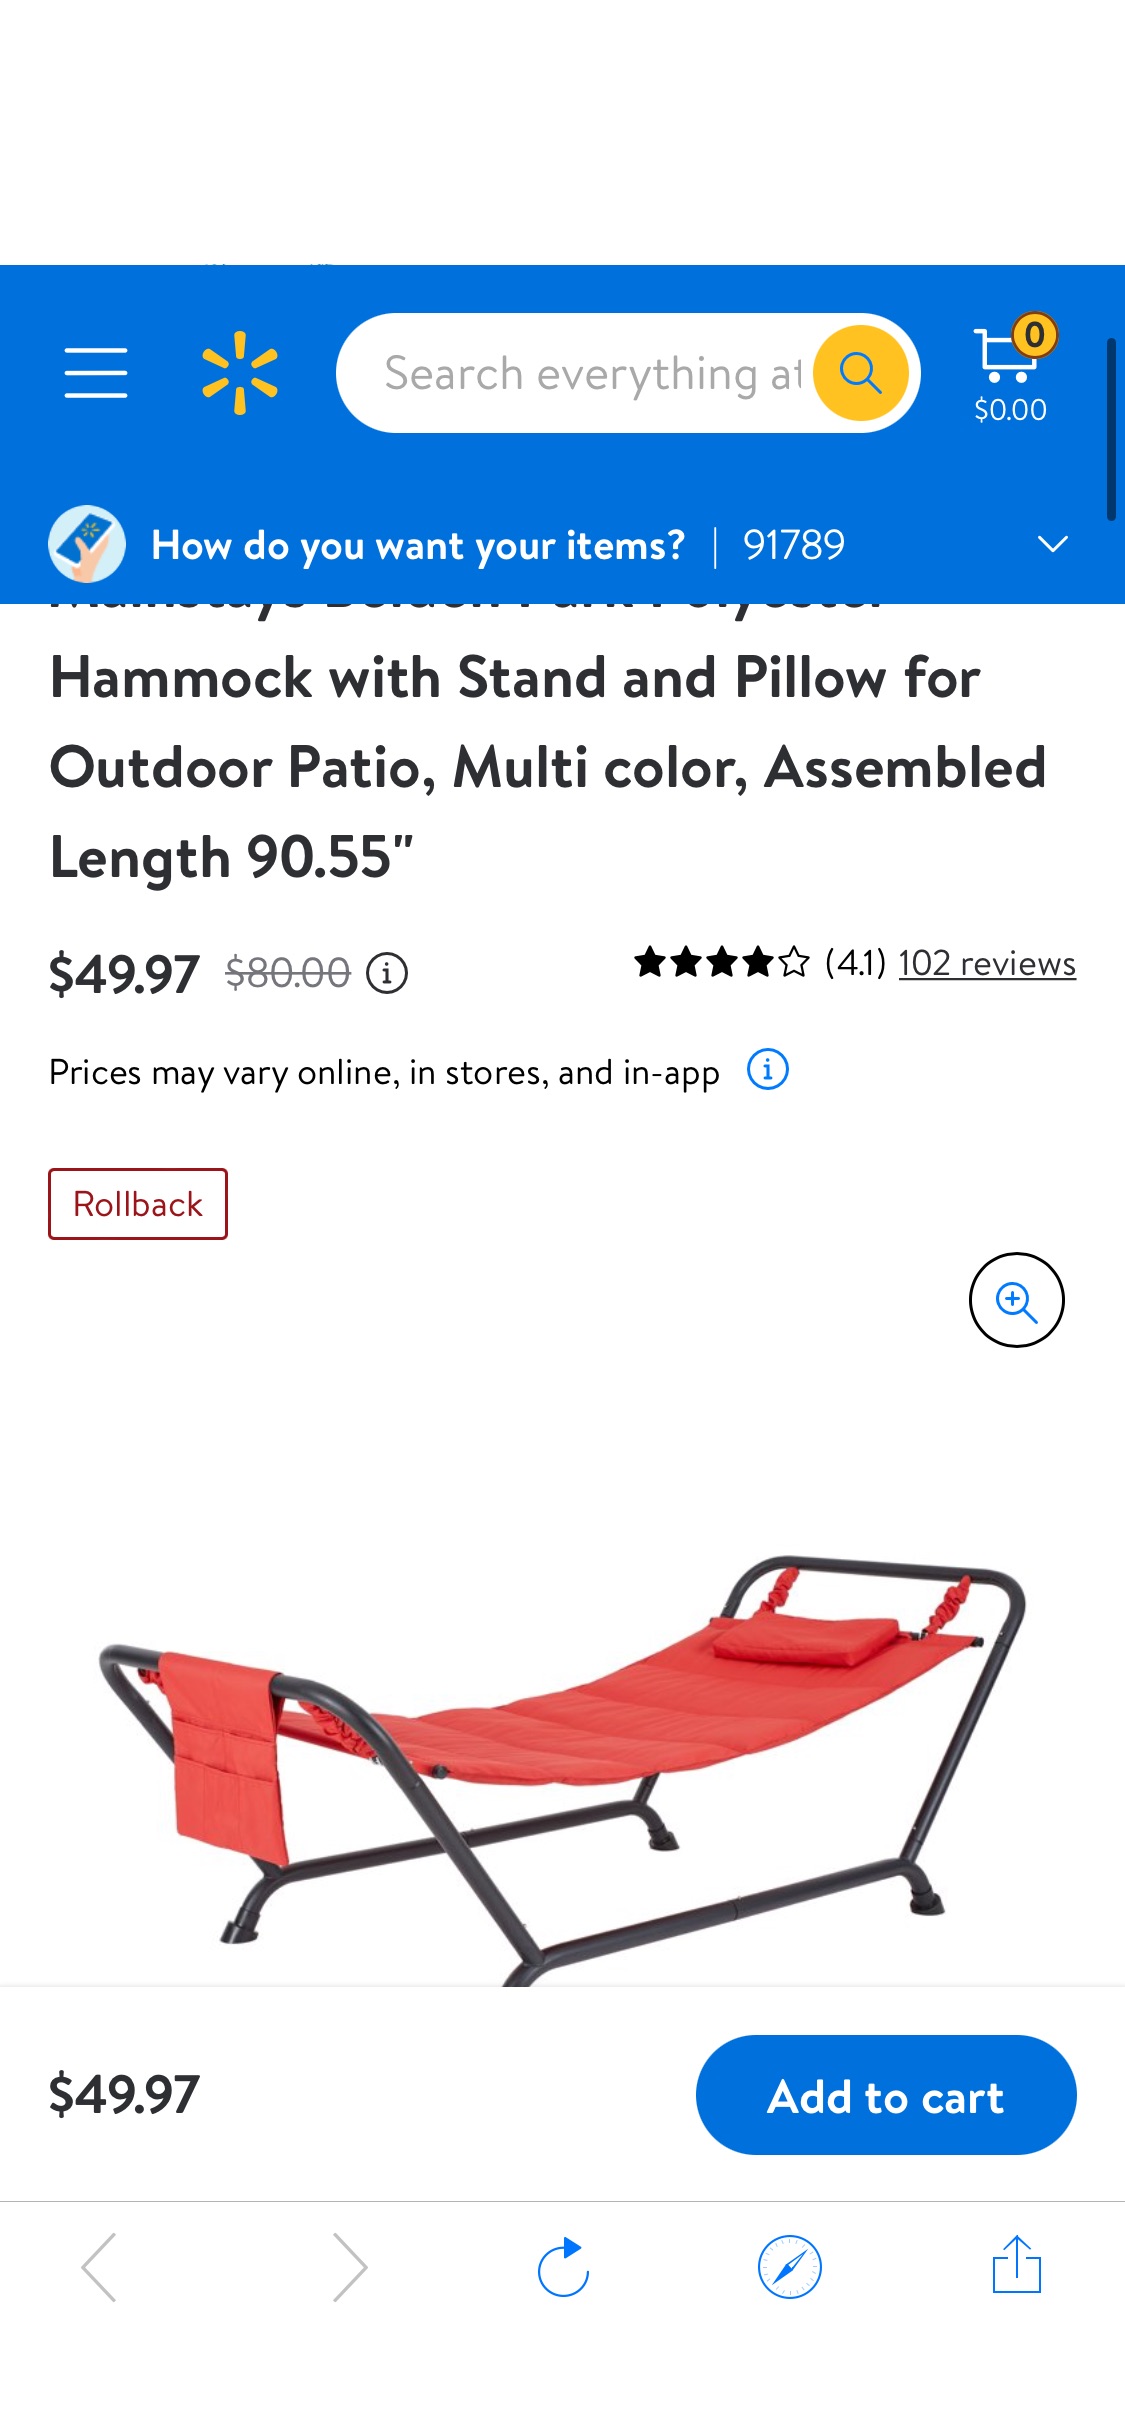 Mainstays Belden Park Polyester Hammock with Stand and Pillow for Outdoor Patio, Multi color, Assembled Length 90.55" - Walmart.com